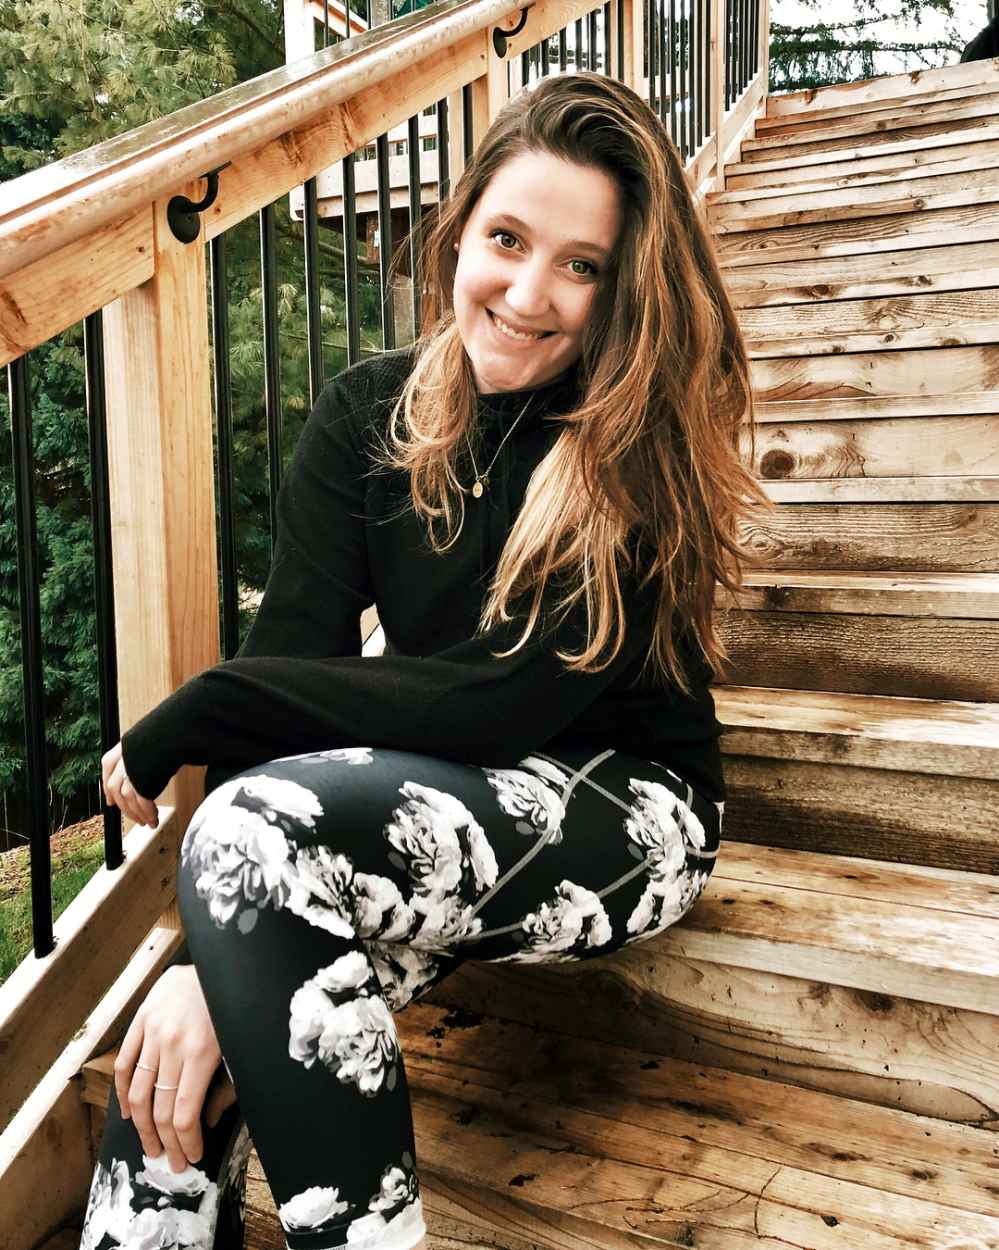 Tori Roloff Is Having a ‘Hard’ Time Loving Her Postpartum Body ‘I Know It’s Temporary’